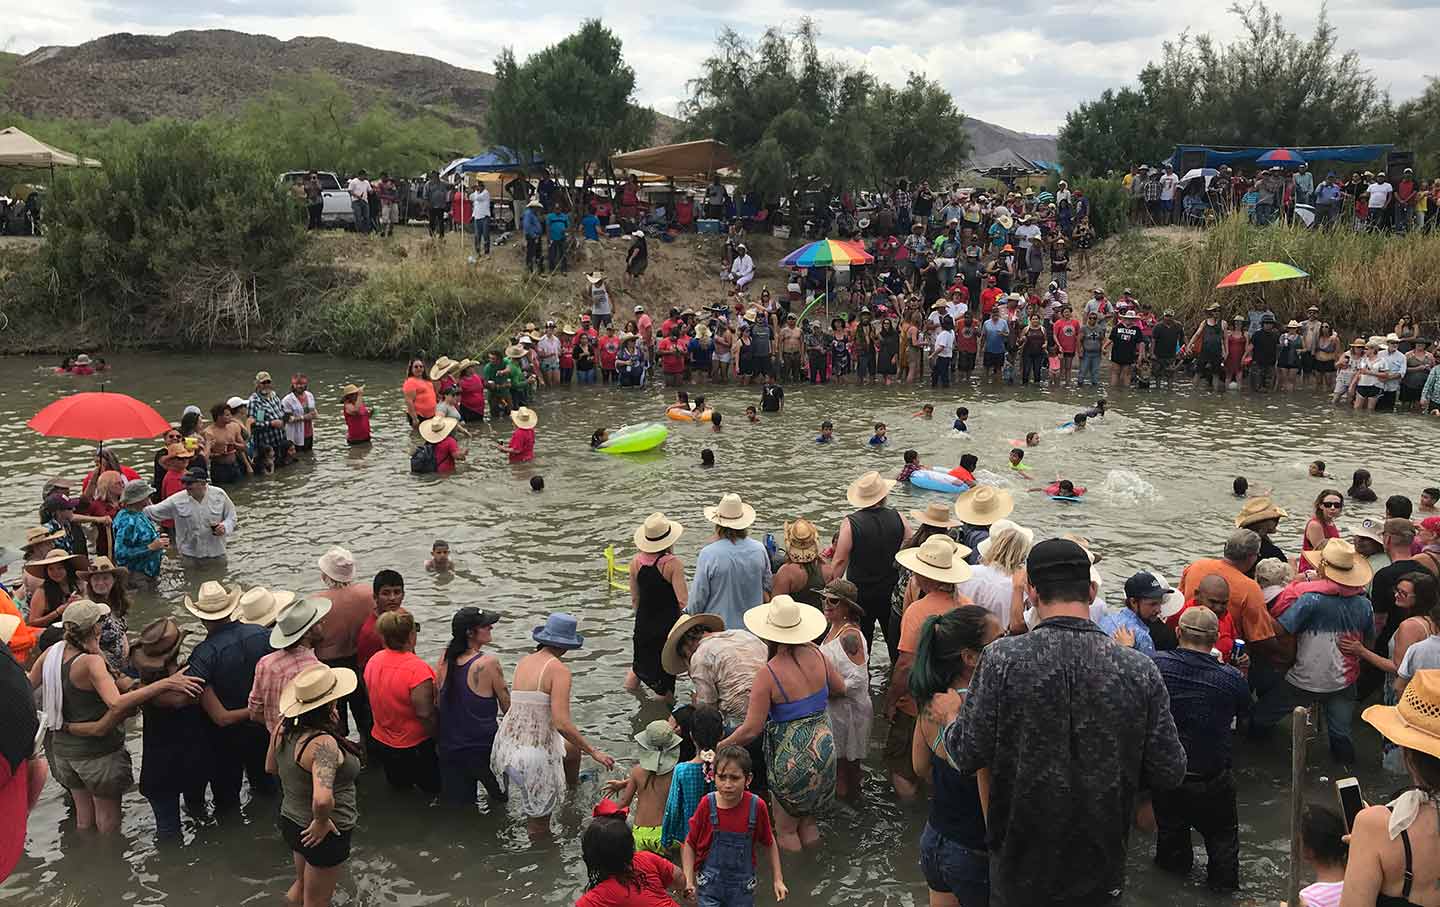 People gather to celebrate at the Rio Grande